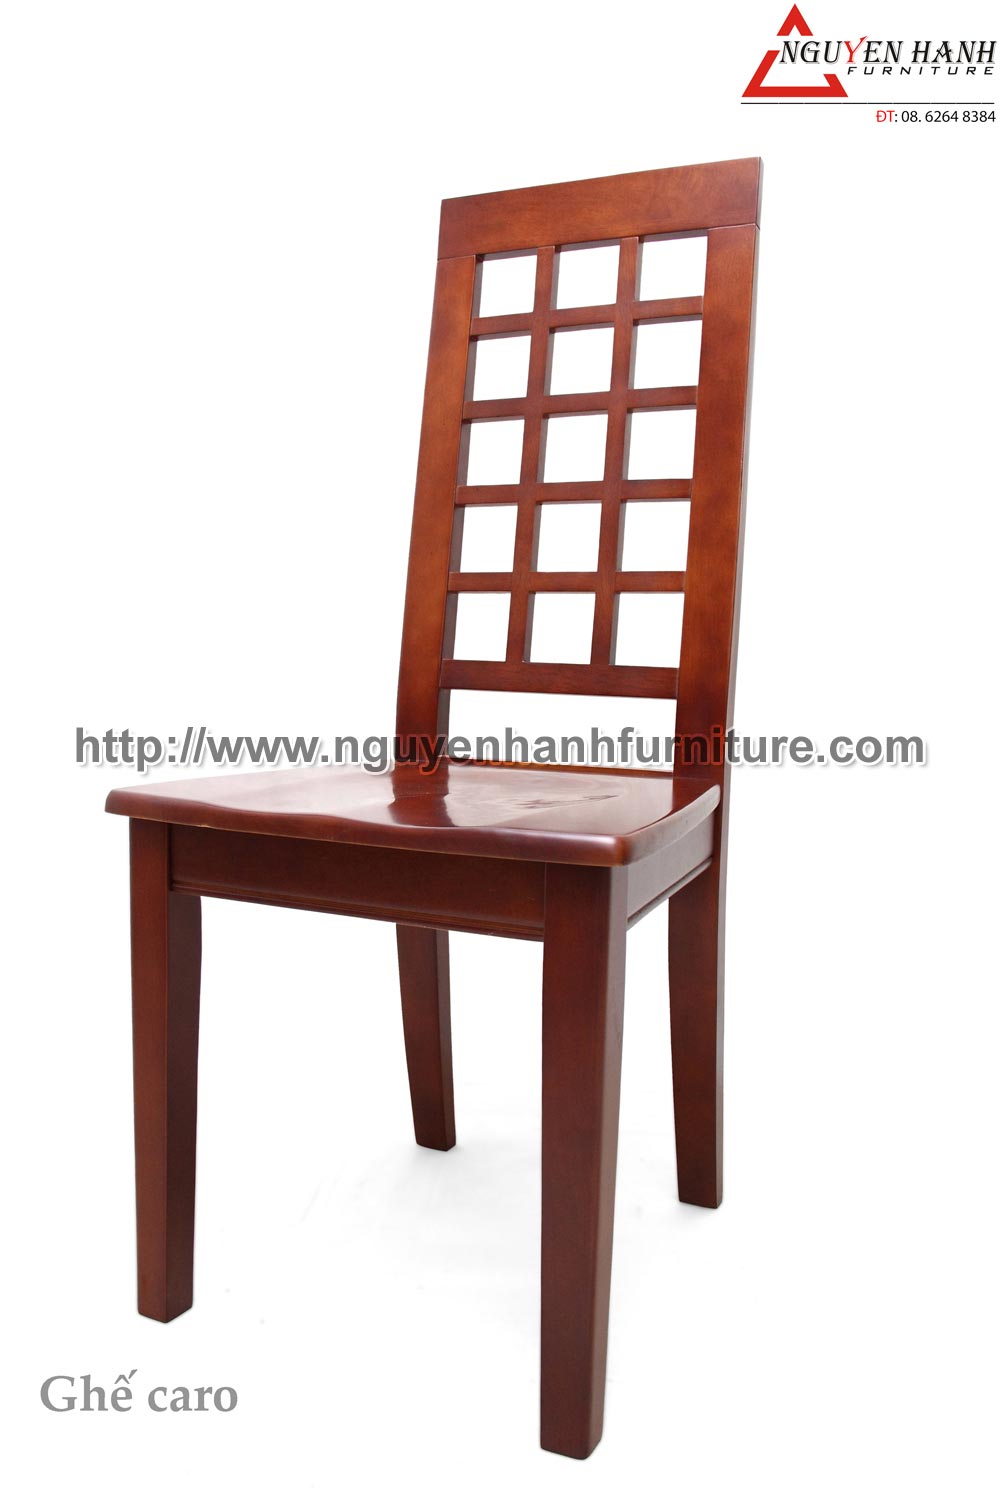 Name product: caro chair- Dimensions:  - Description: Wood natural rubber